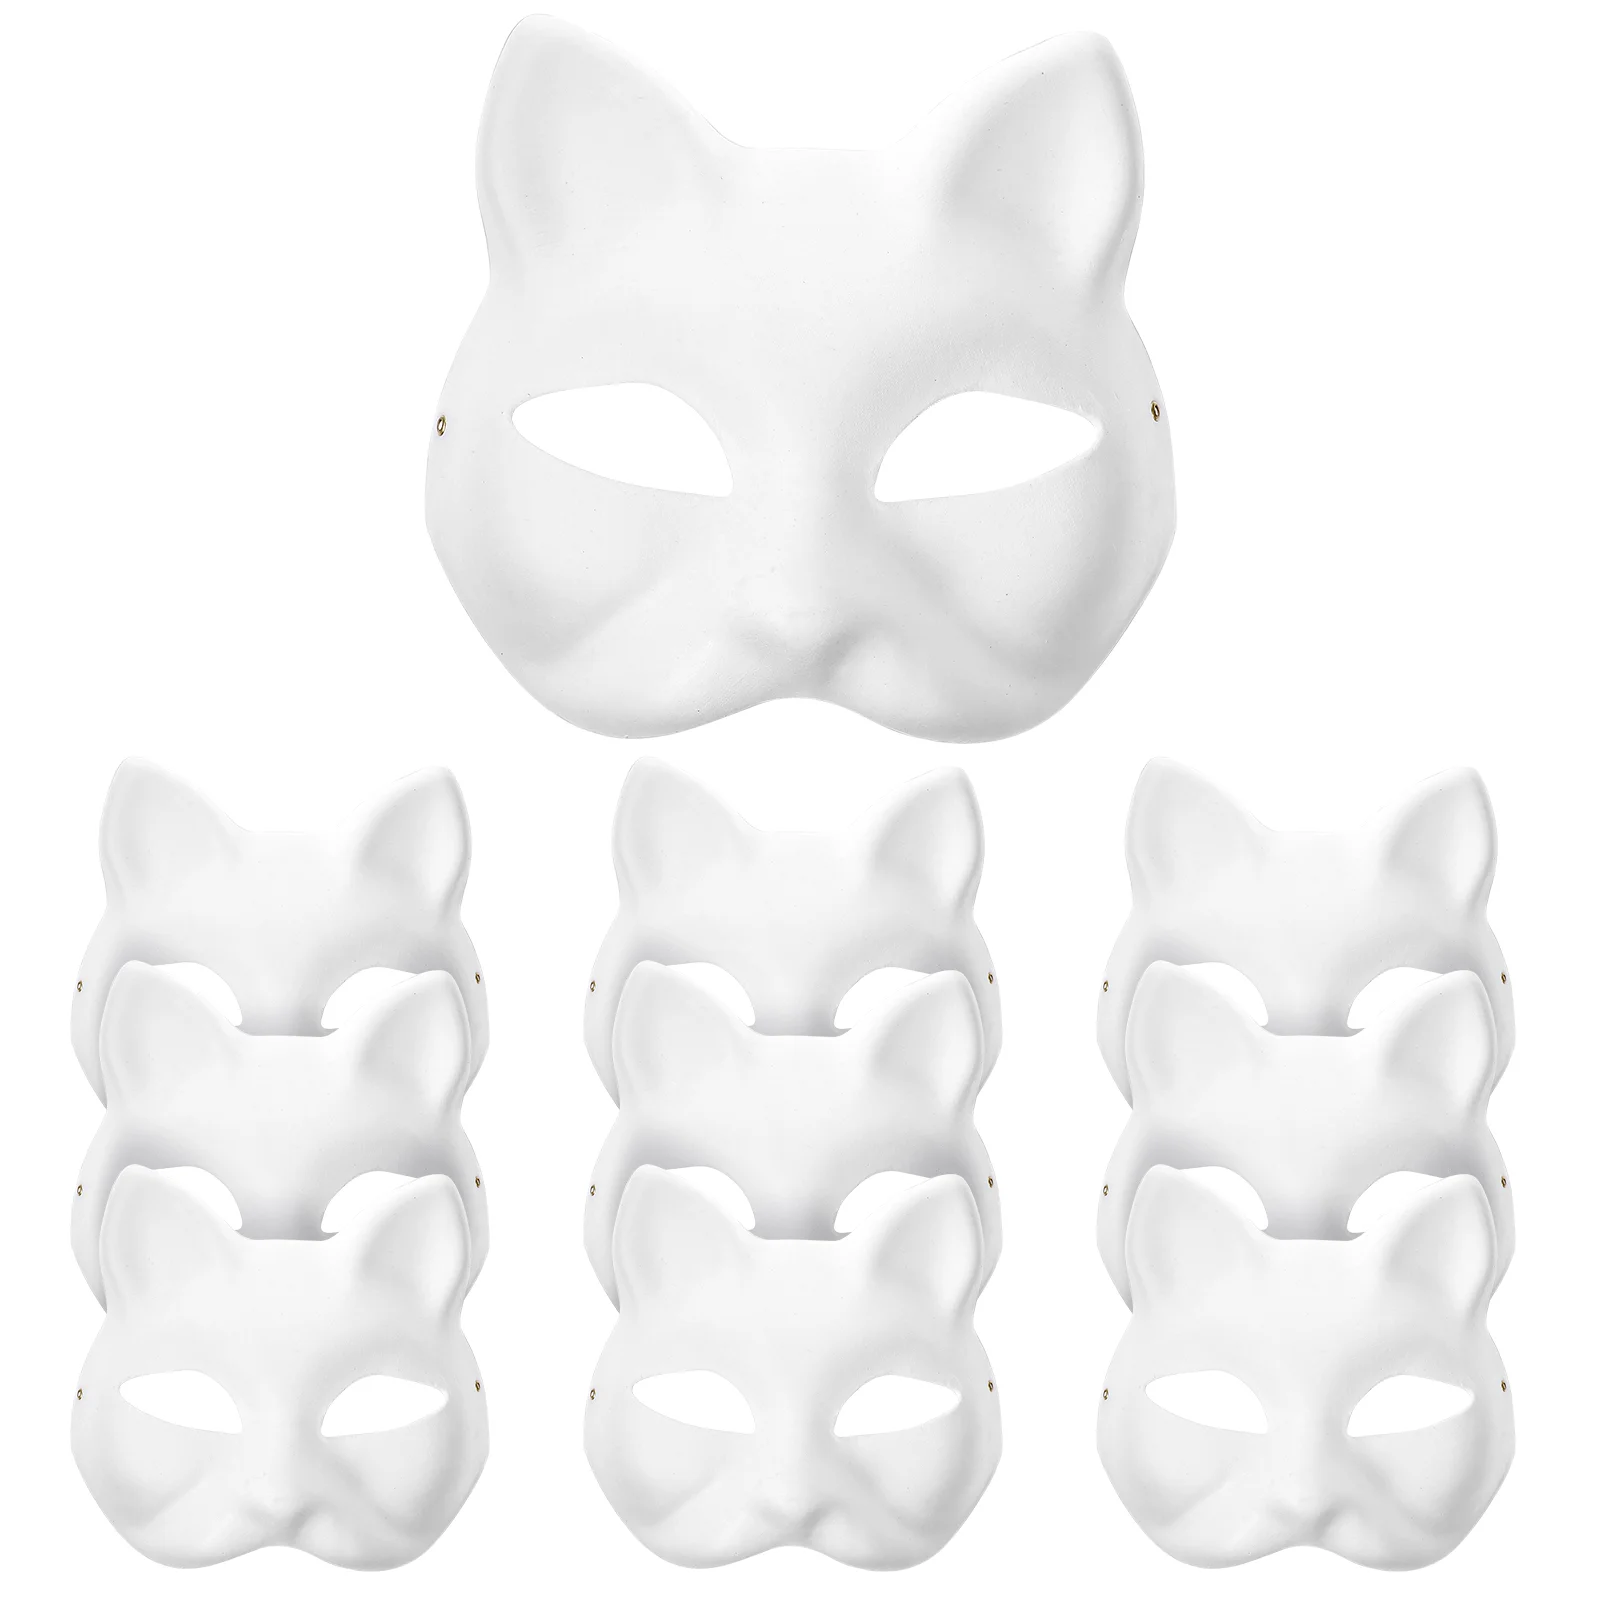 

10Pcs DIY White Paper Unpainted Cat Blank Hand Painted Plain Masquerade for Decorating Craft Party Favors